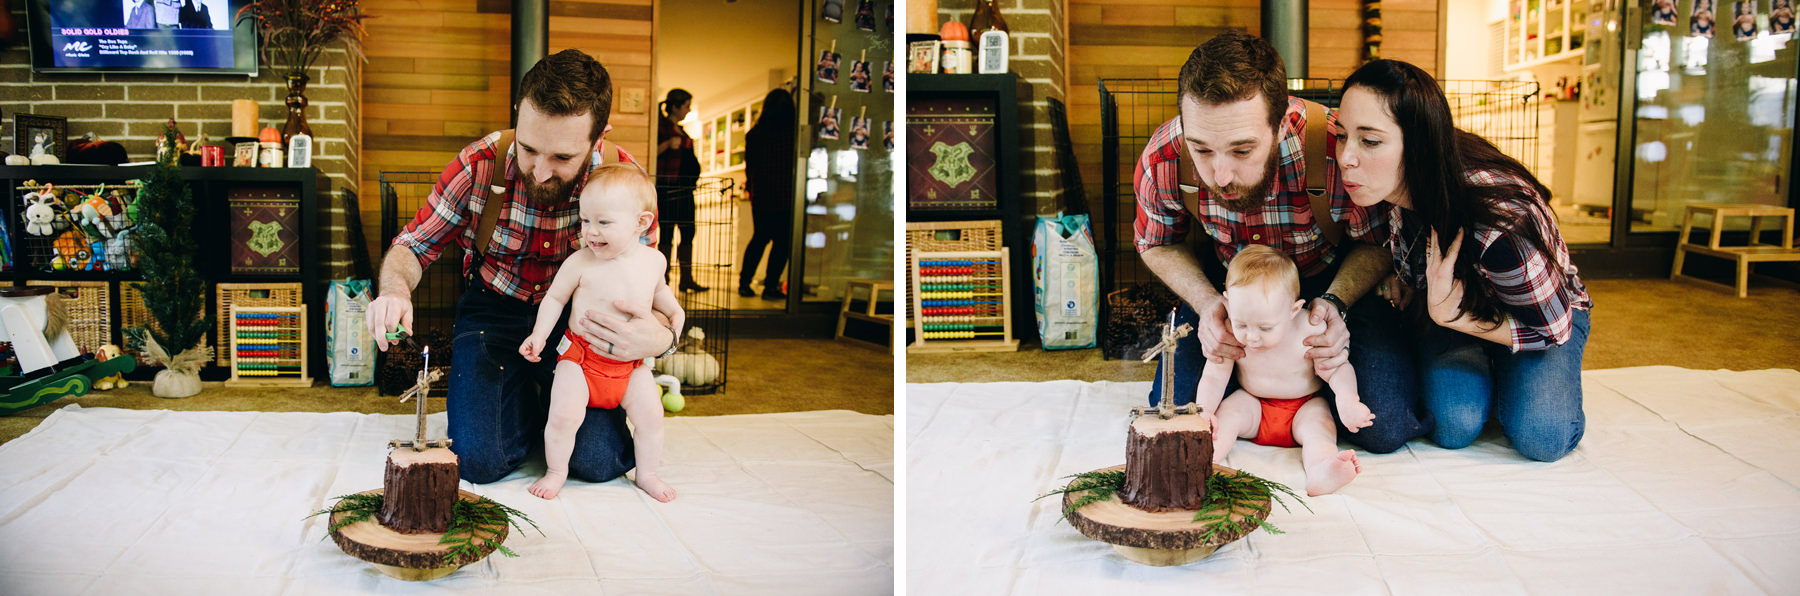 baby-first-birthday-seattle-family-photographer-9